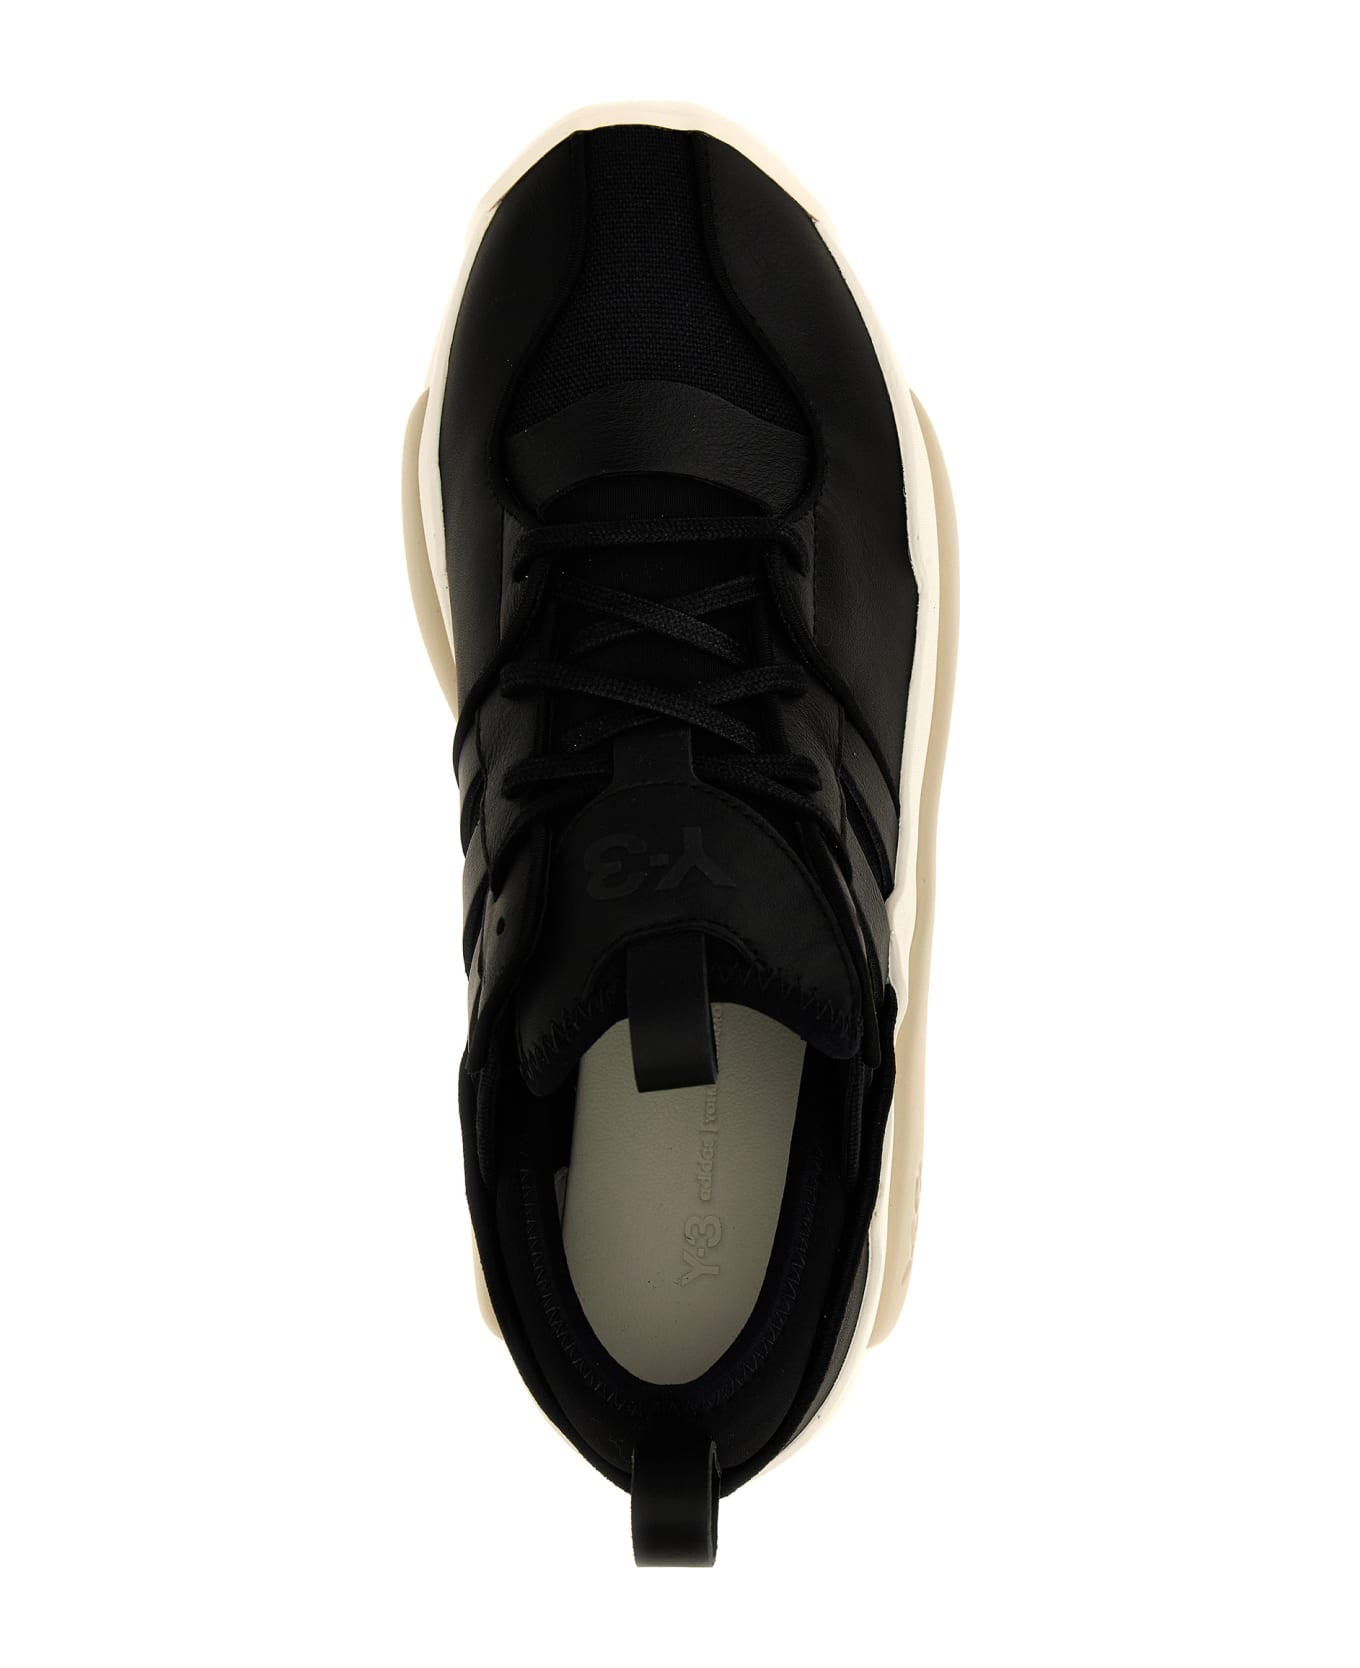 Y-3 'rivalry' Sneakers - White/Black